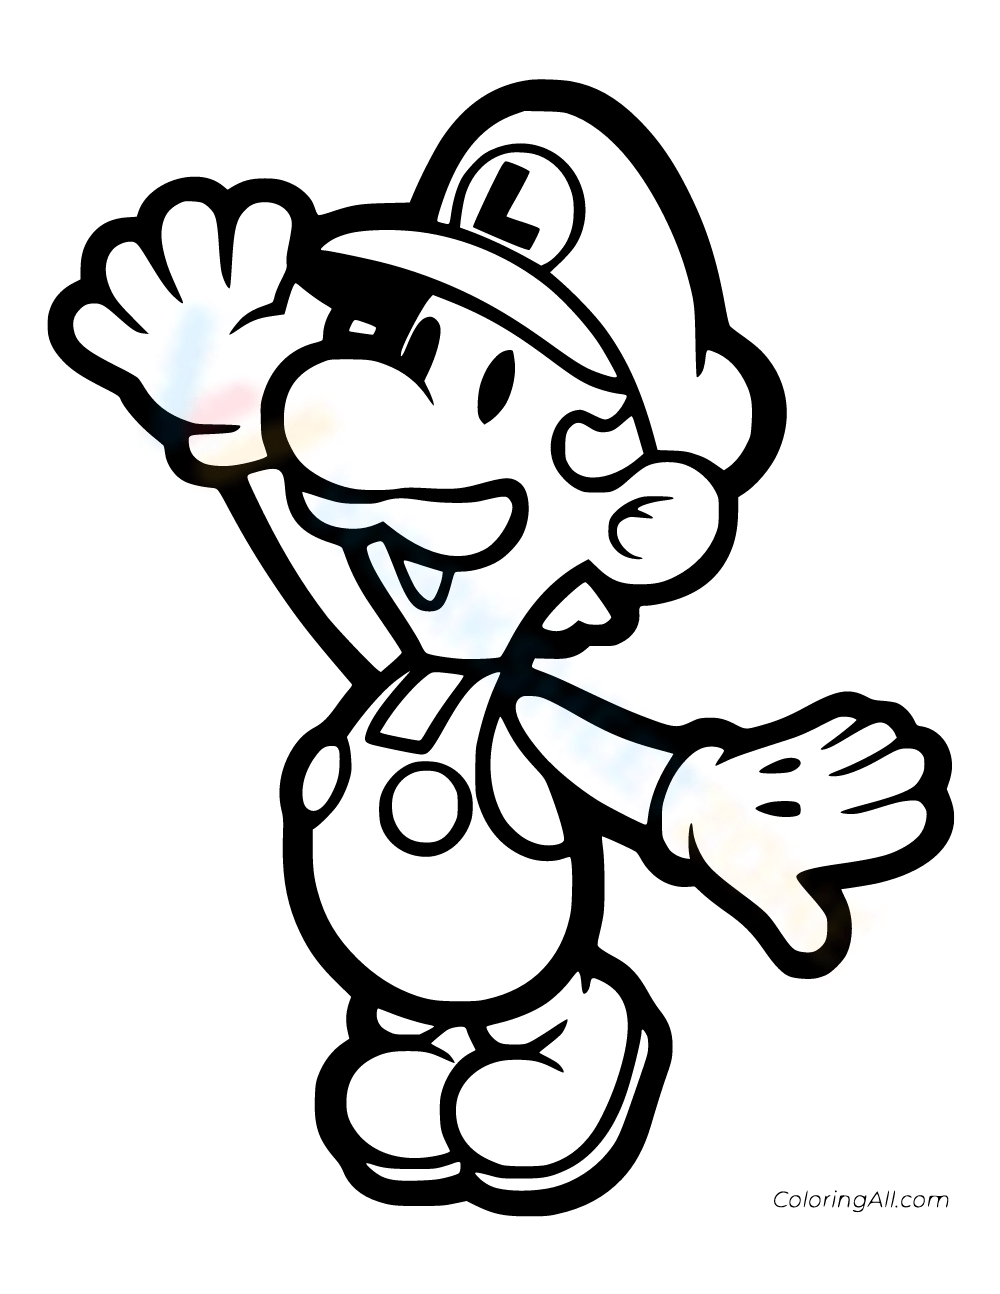 Free collection of luigi coloring pages for kids